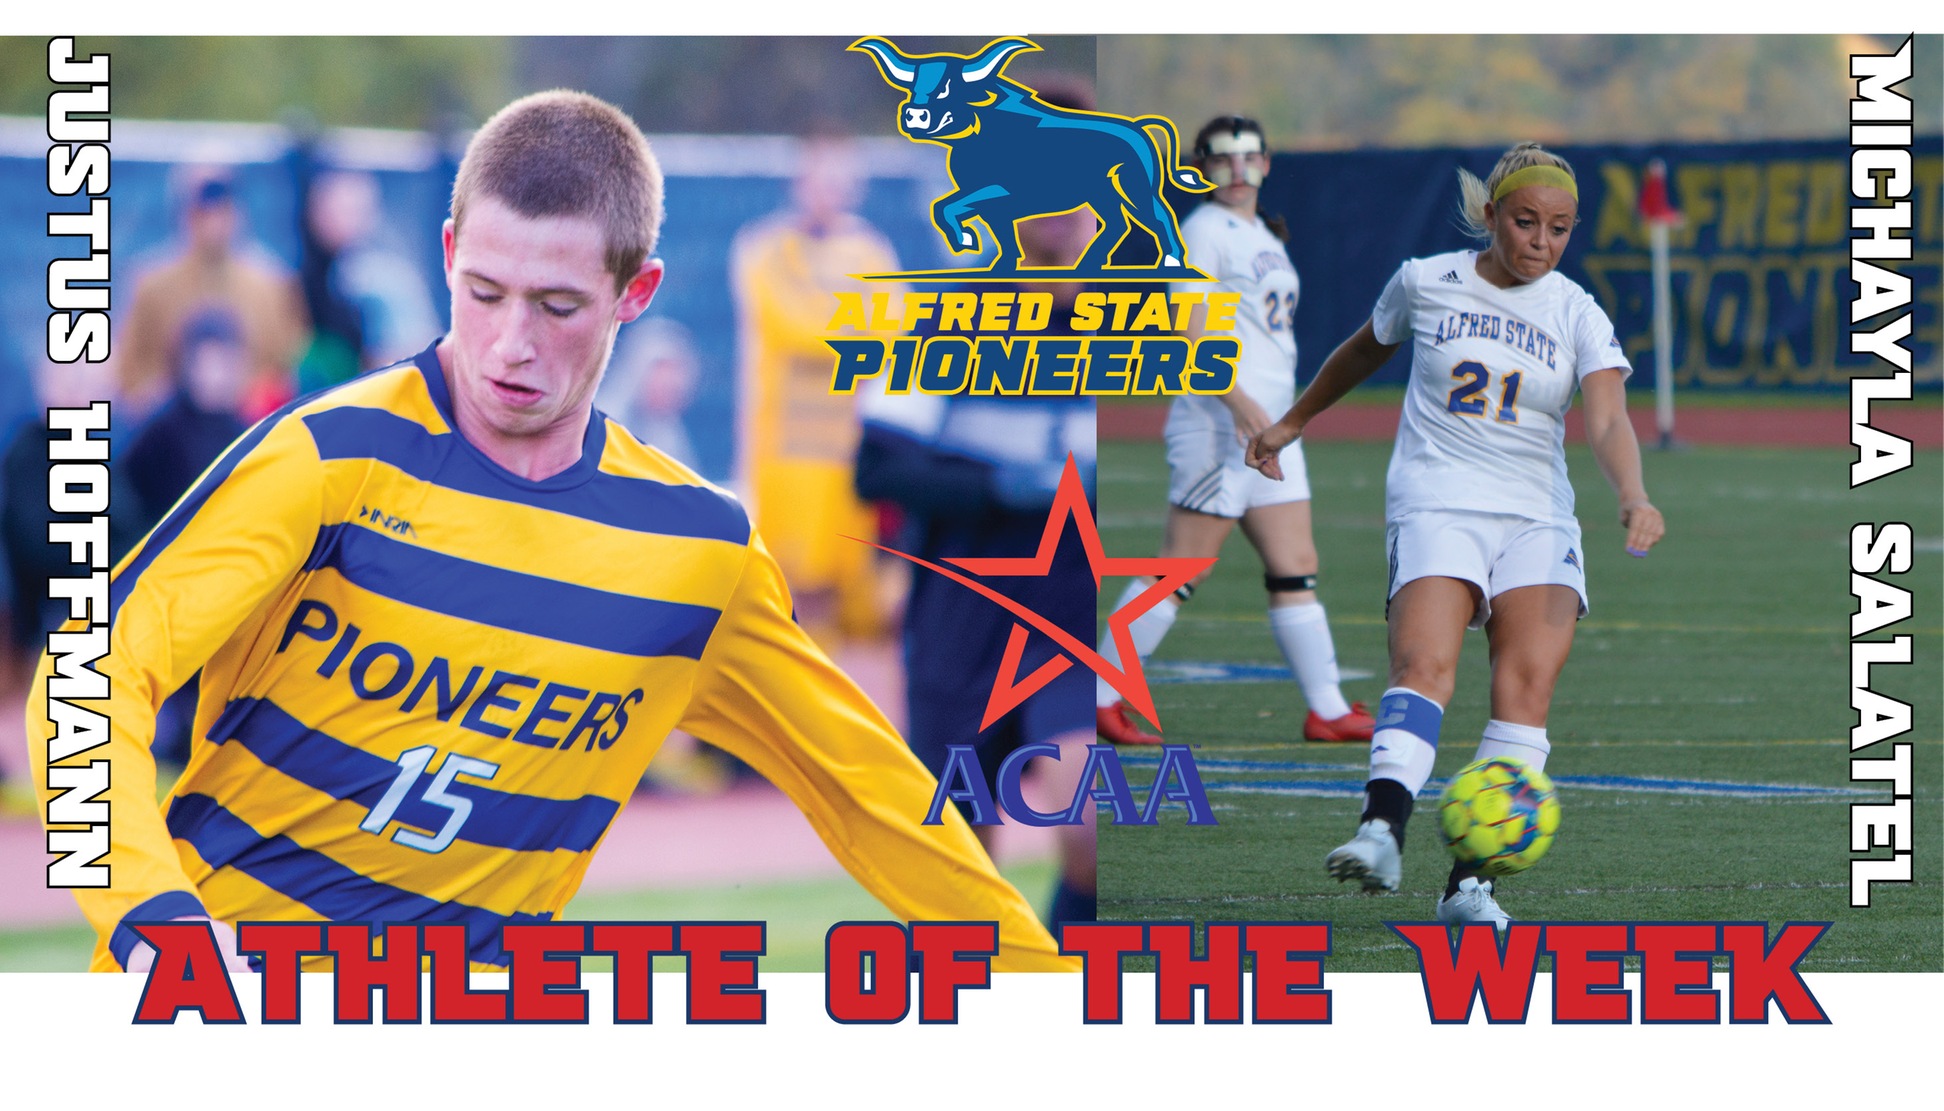 Hoffmann and Salatel named ACAA Player of the Week